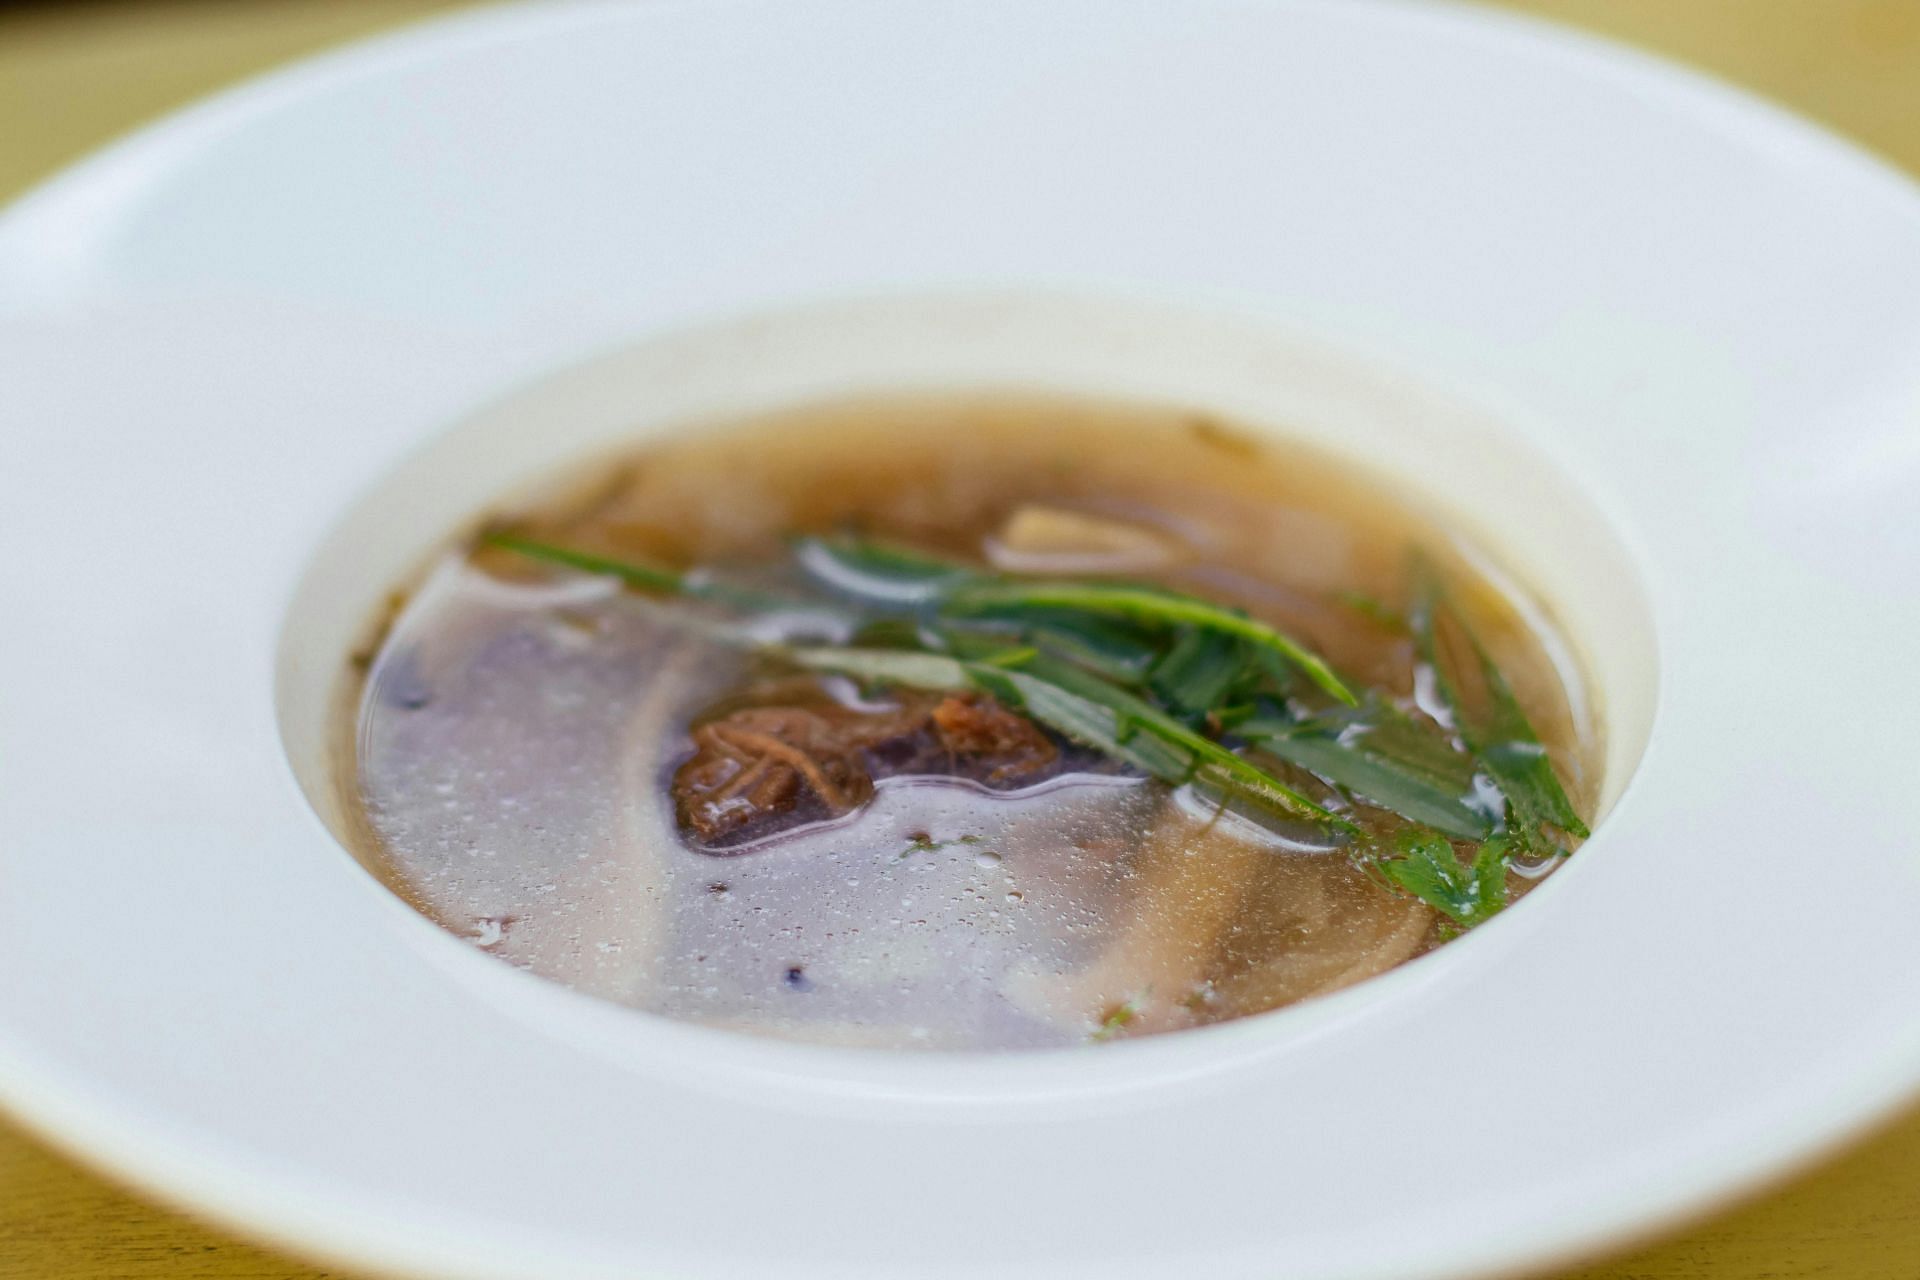 benefits of souping (image sourced via Pexels / Photo by valeria)